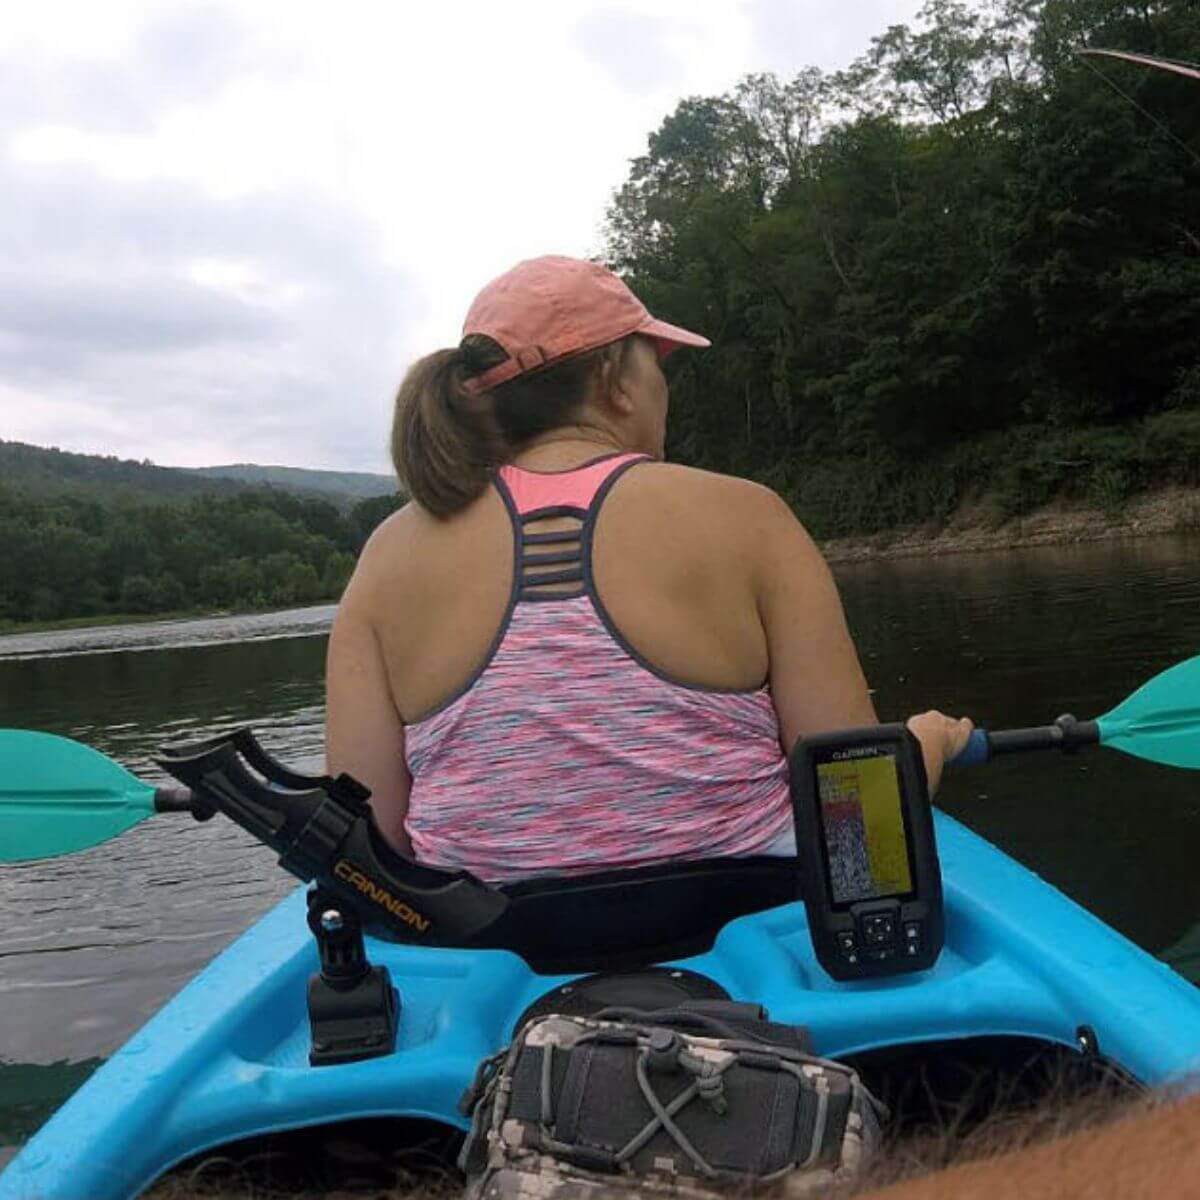 The Best Kayak Rod Holders: Which One Is Right for You?